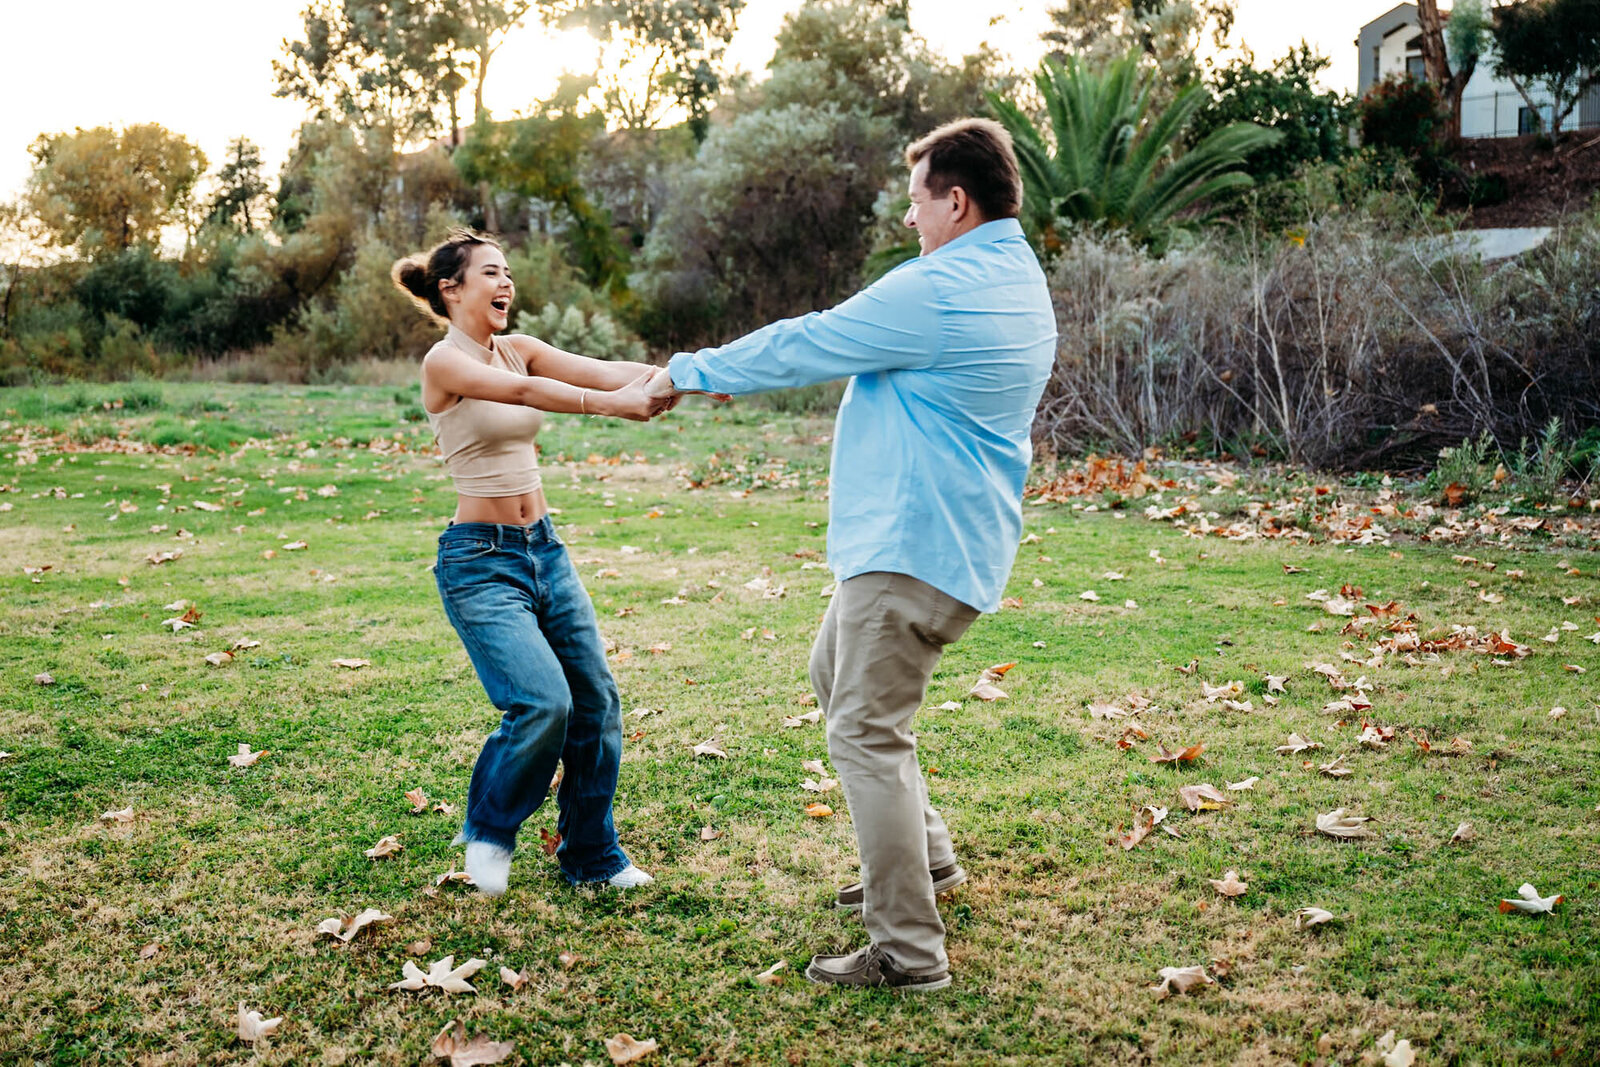 Temecula dad spins his teenage daughter around as she laughs